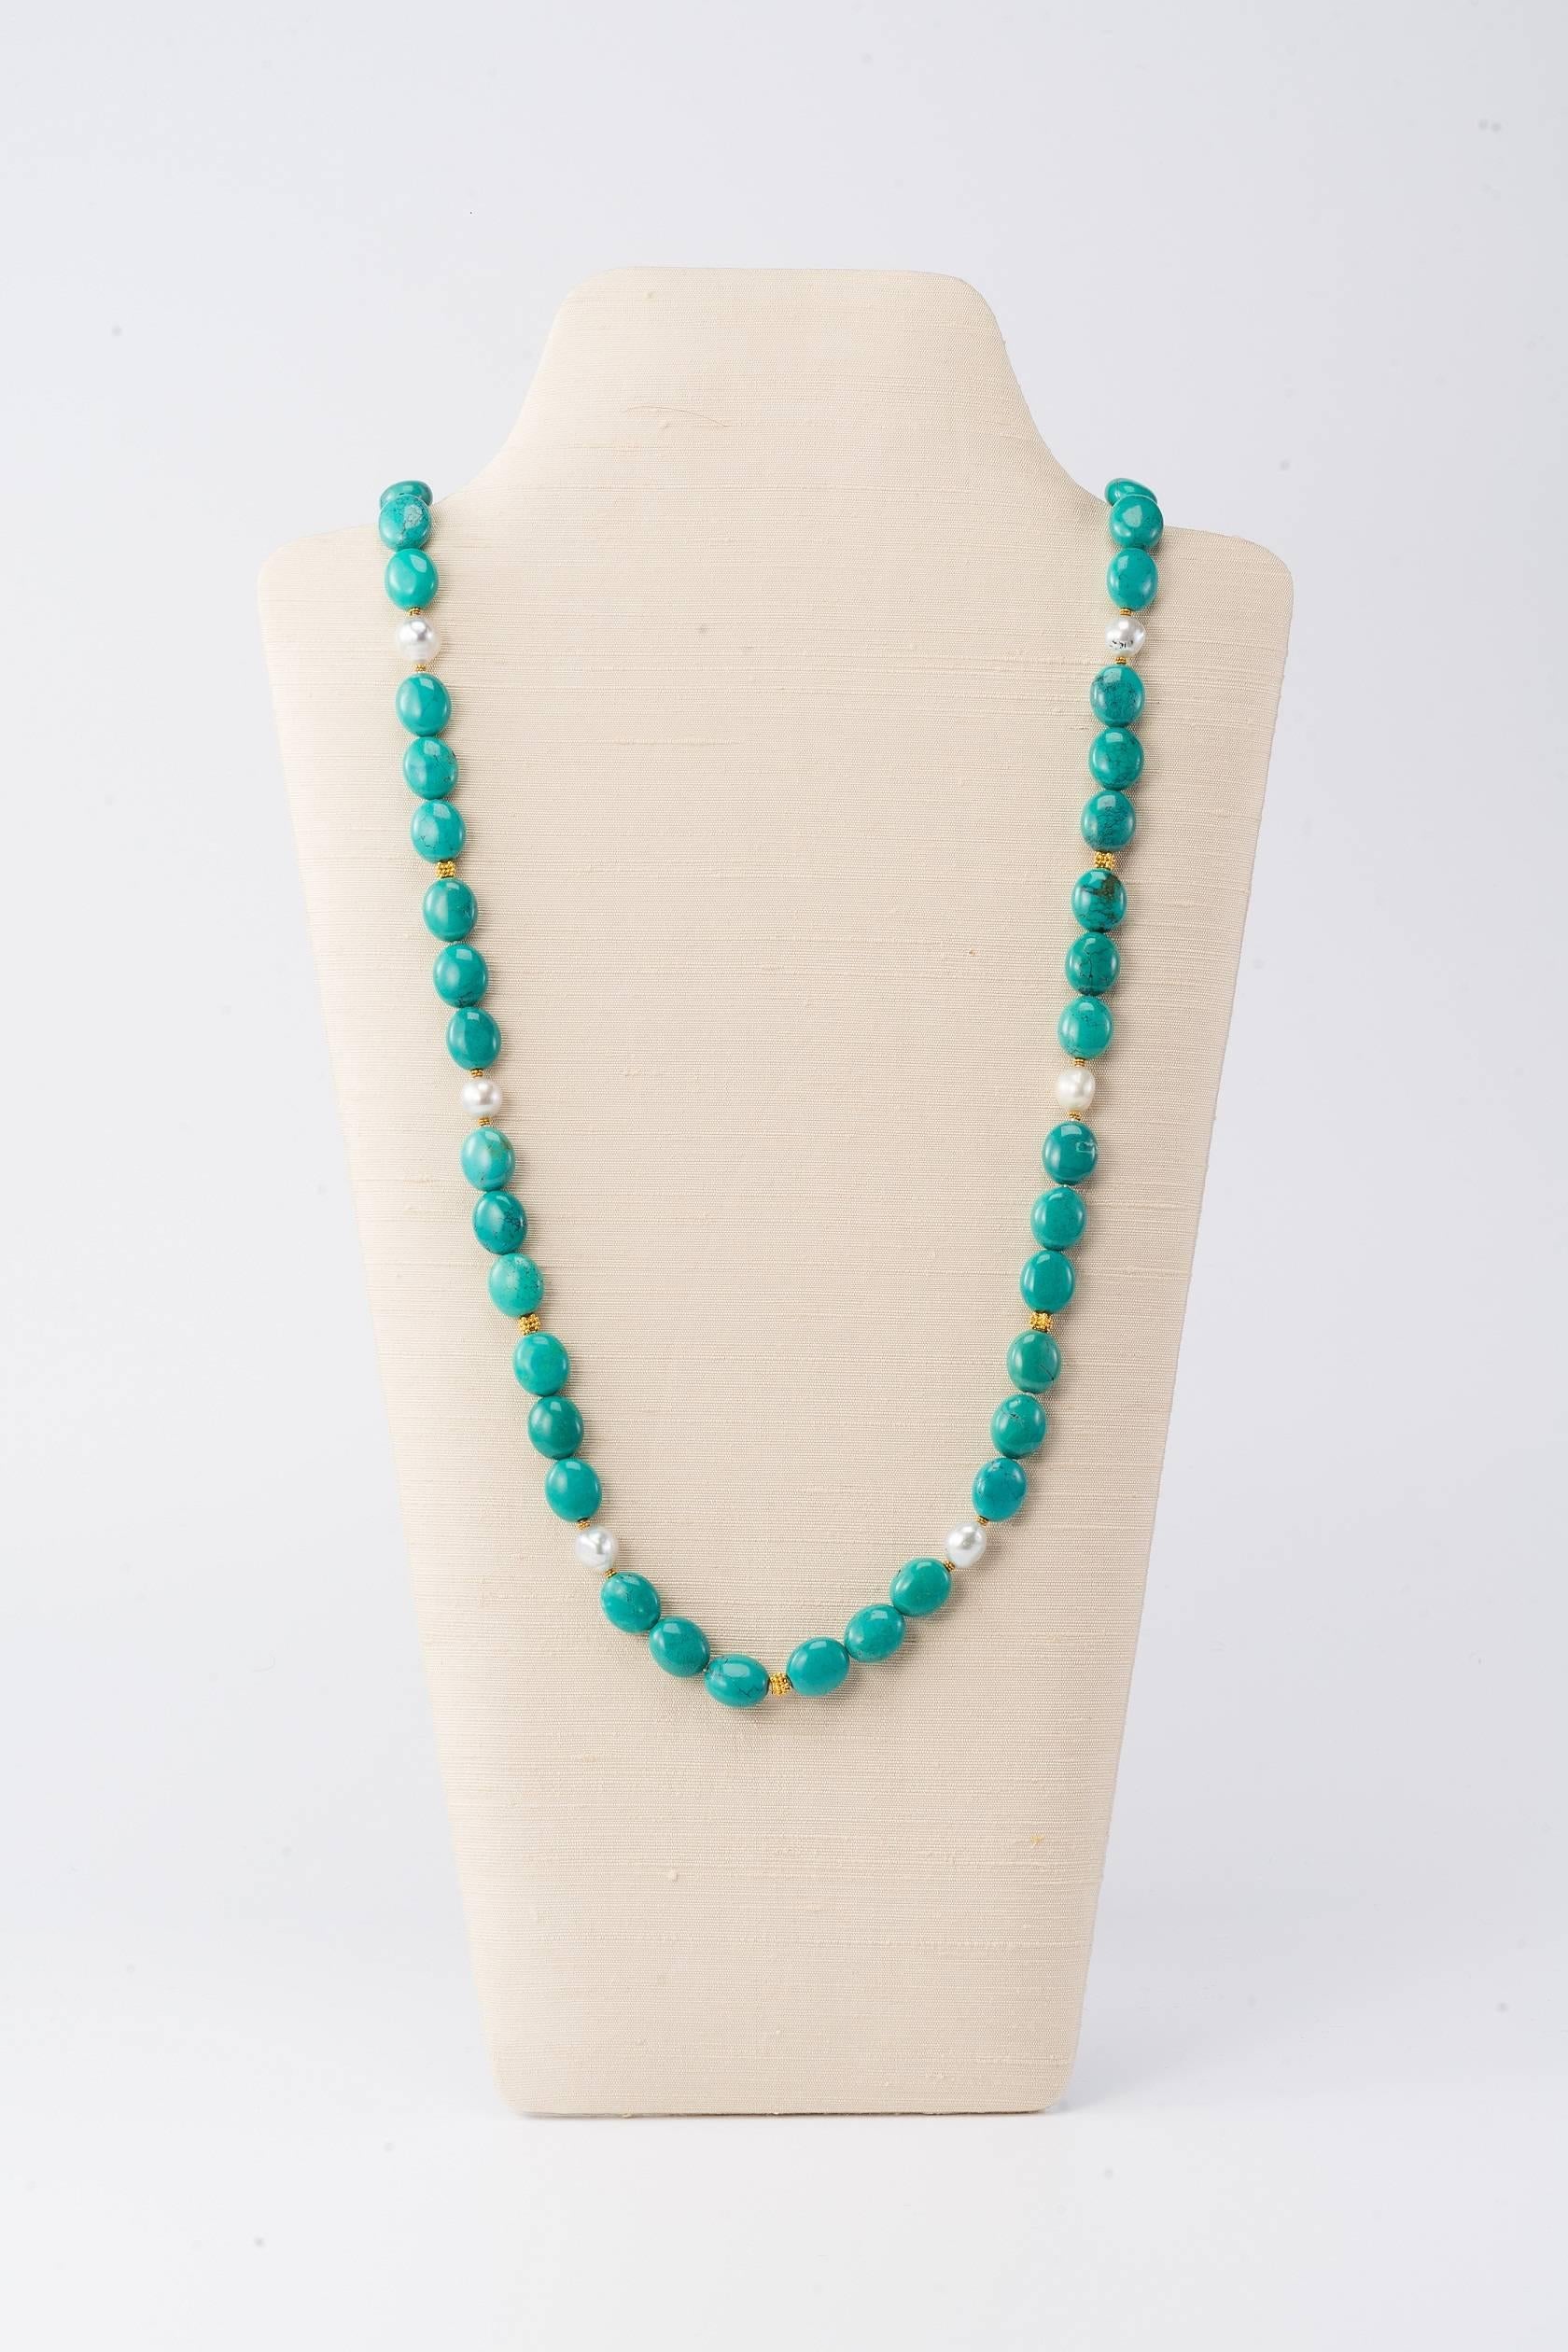 36 in (91.5cm) long necklace with Tibetan turquoise, South Sea pearls and 18 karat gold beads

These beautiful turquoise disc beads lay flat when worn and hang comfortably. The colour is gracious and is beautifully accented by the South Sea pearls